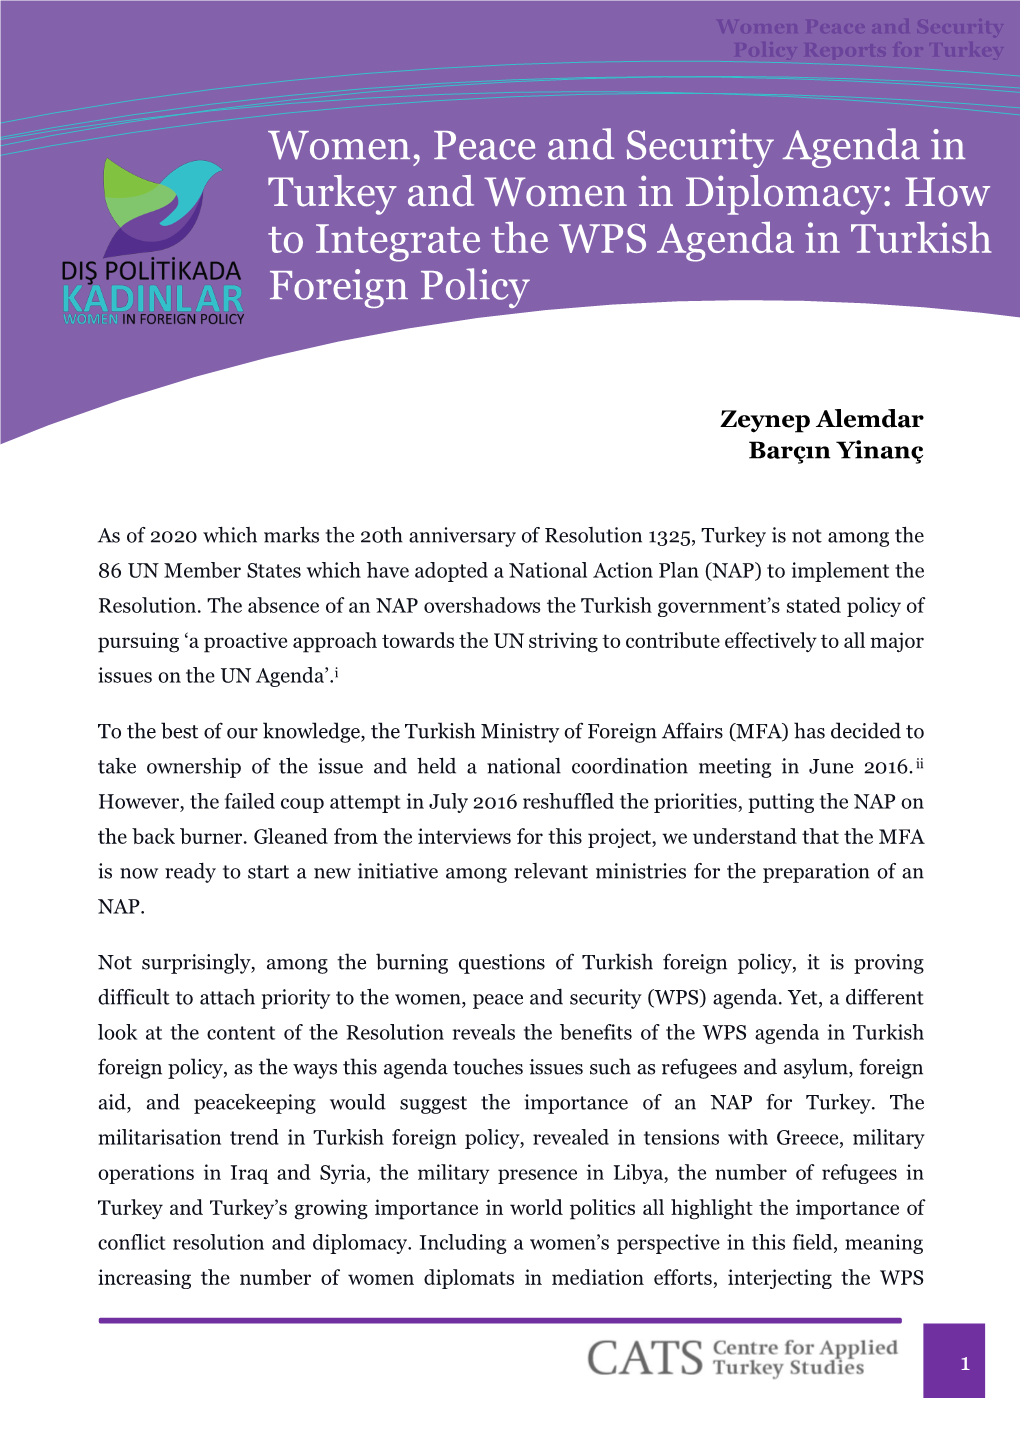 Women, Peace and Security Agenda in Turkey and Women in Diplomacy: How to Integrate the WPS Agenda in Turkish Foreign Policy